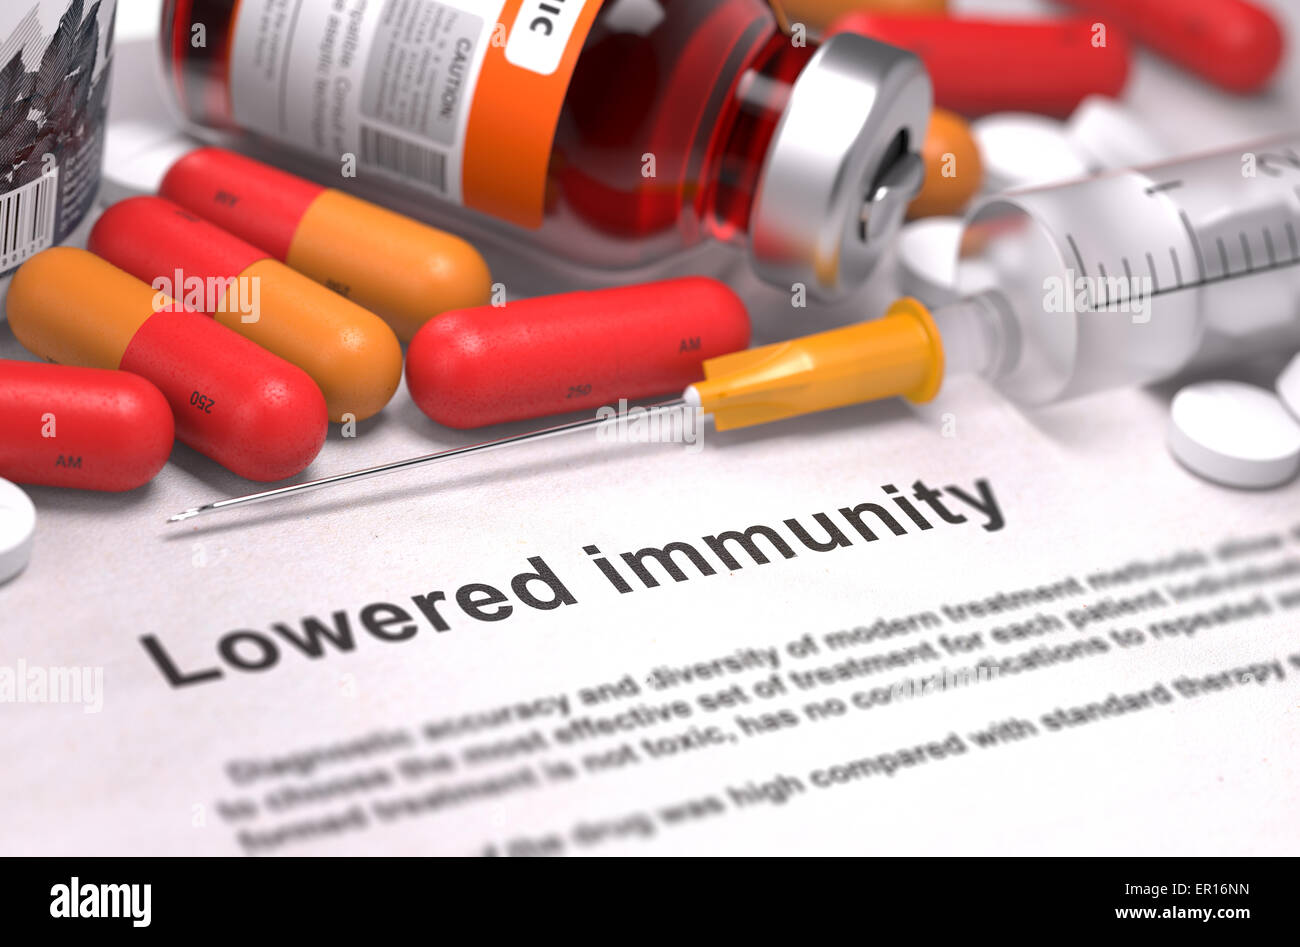 Lowered Immunity - Medical Concept. Stock Photo